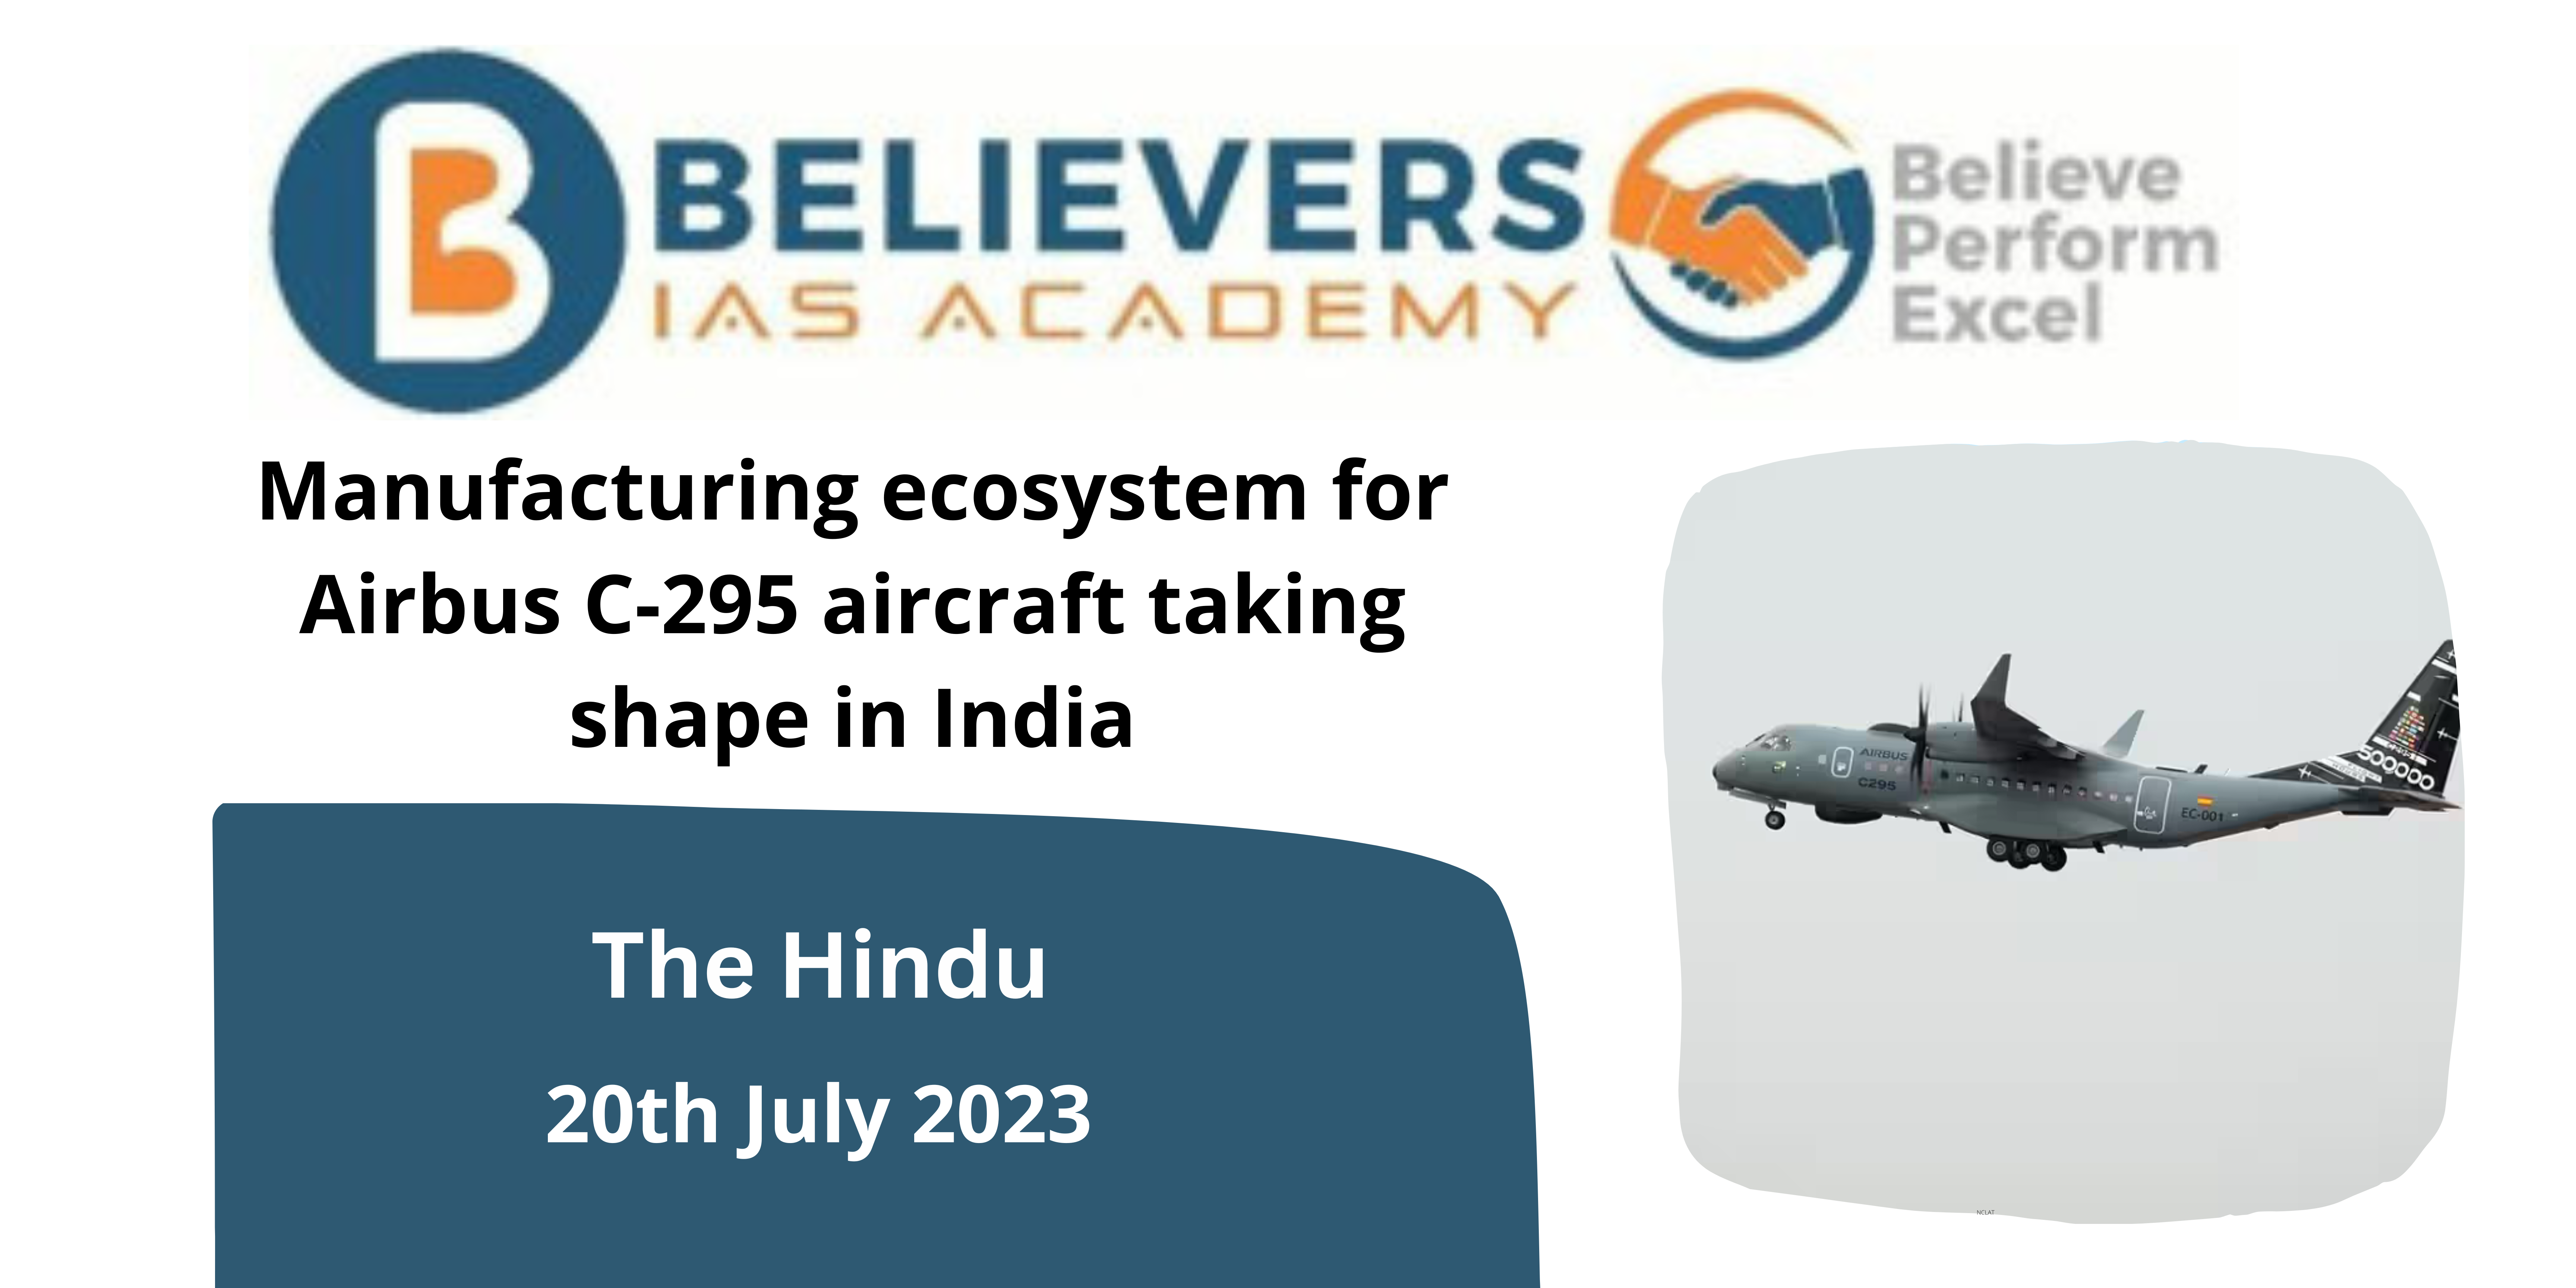 Manufacturing ecosystem for Airbus C-295 aircraft taking shape in India